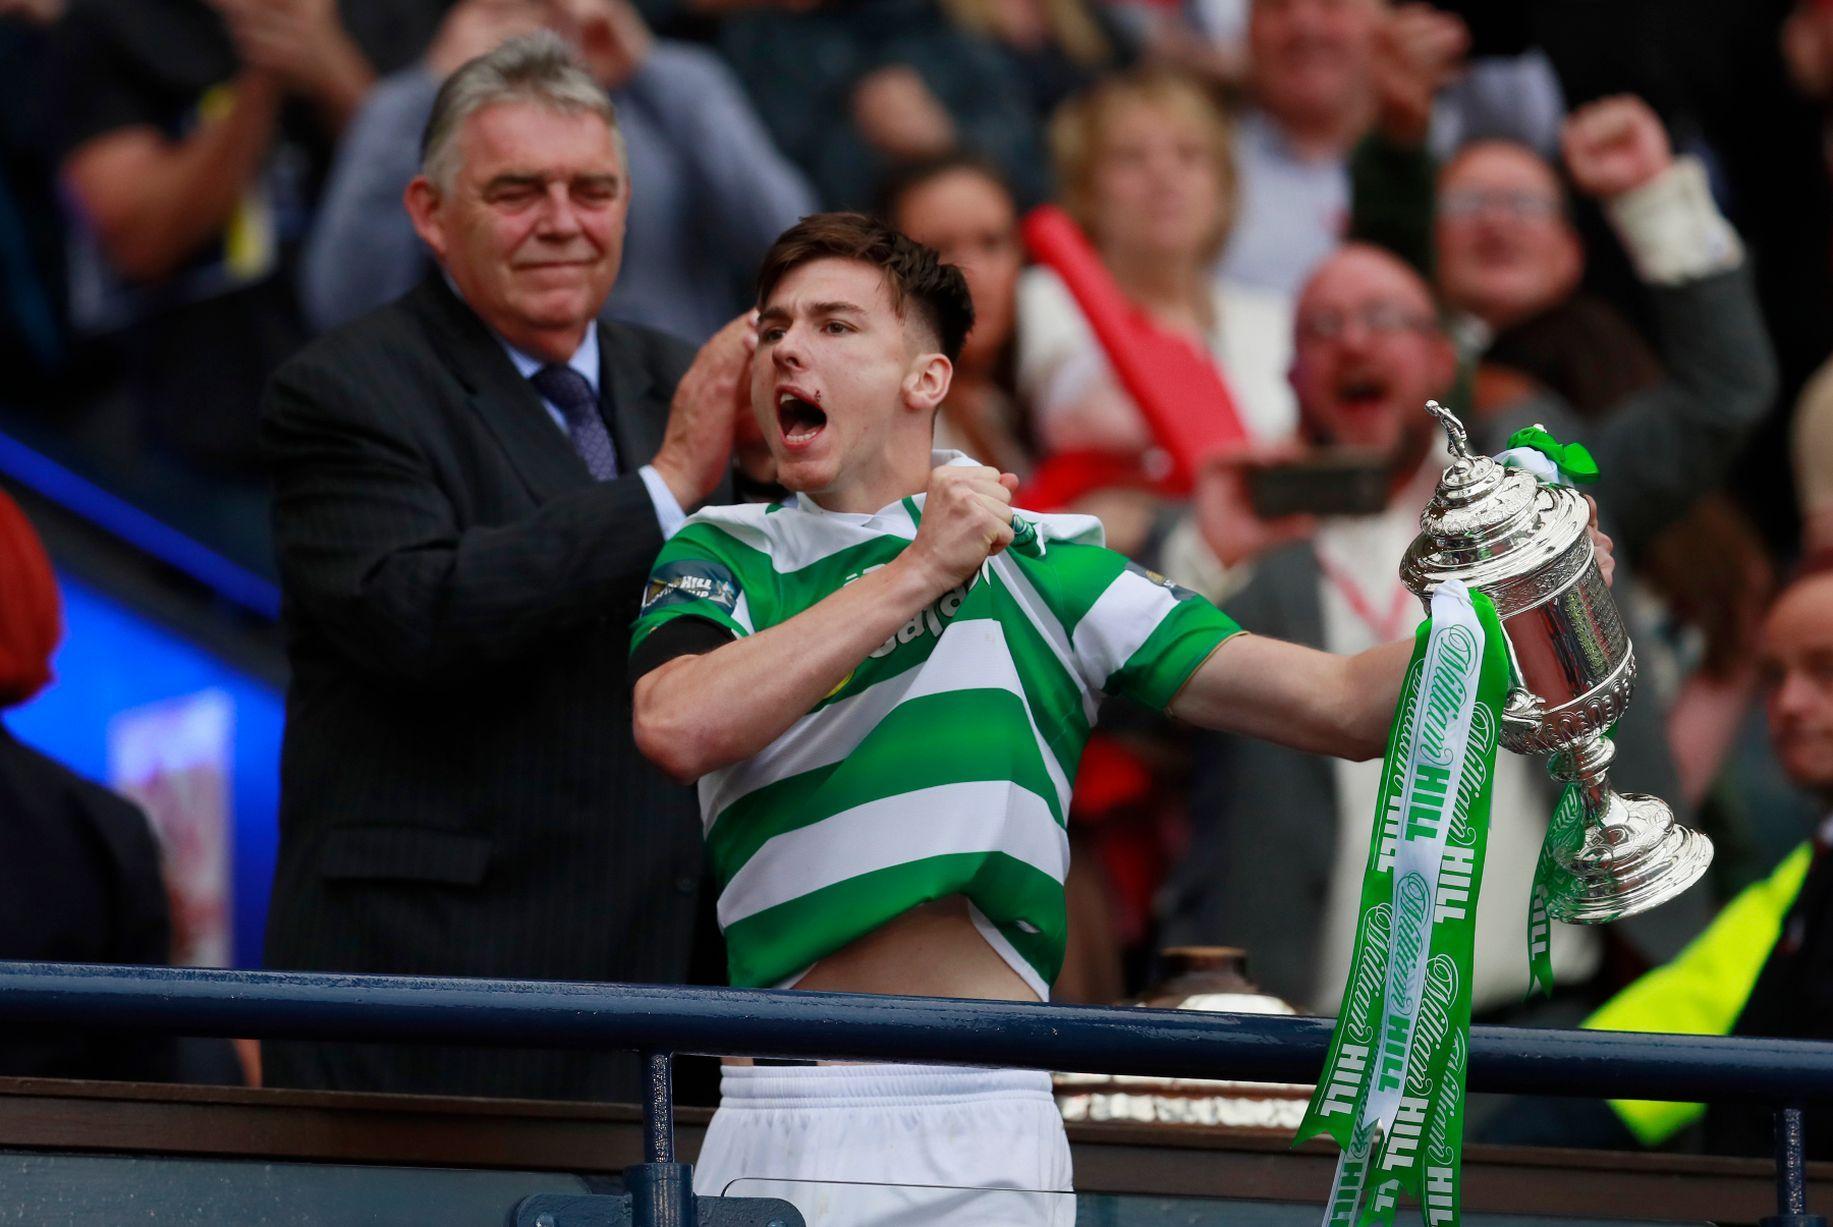 Celtic's Kieran Tierney lifts the Scottish Cup trophy. Football